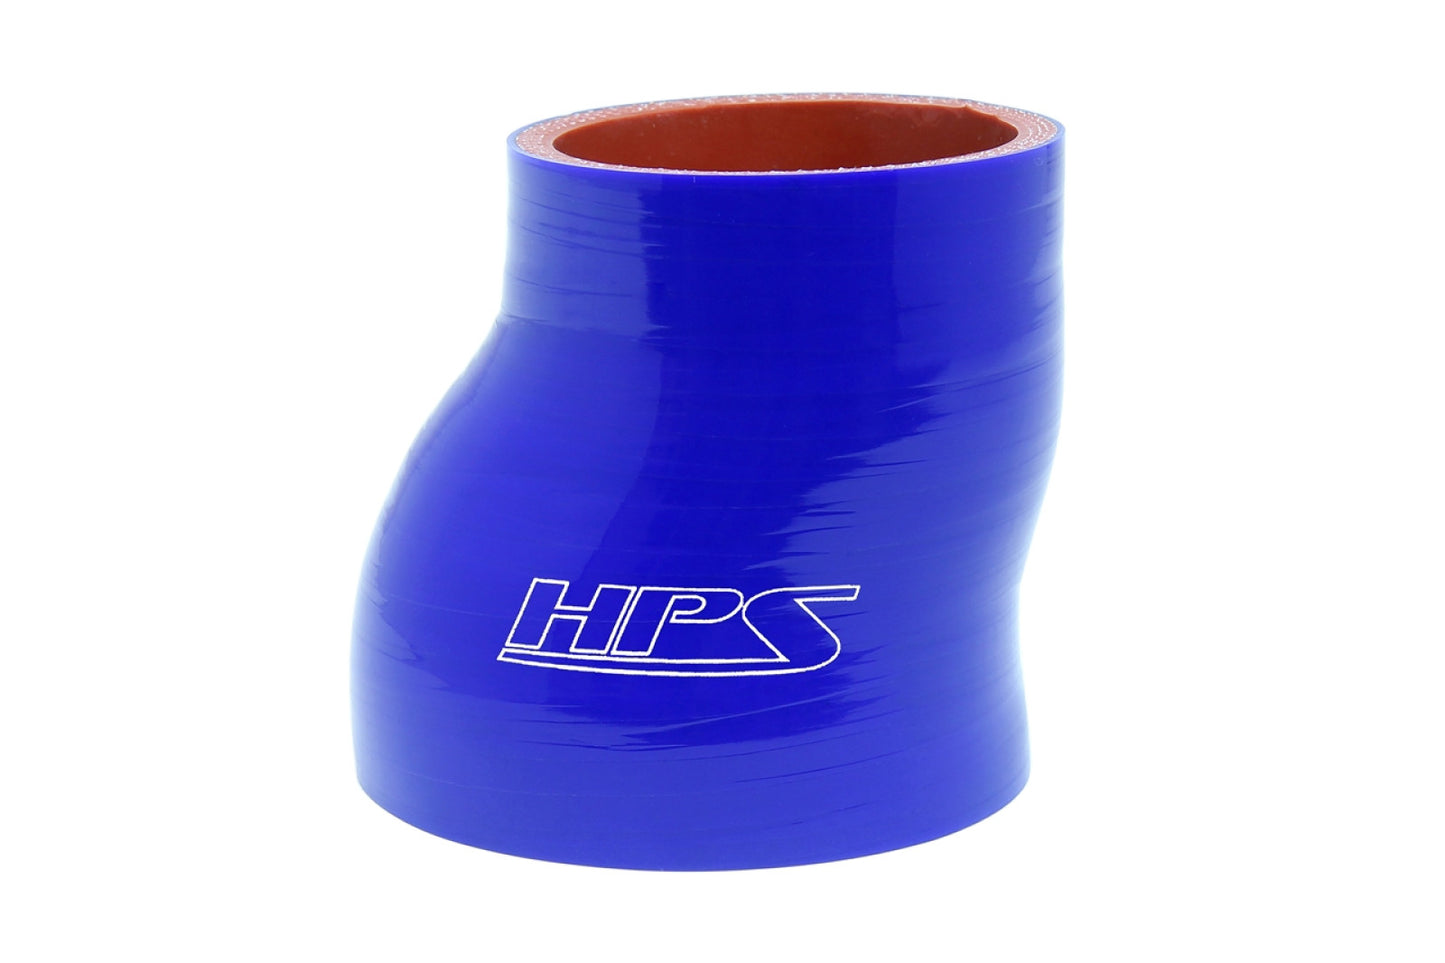 HPS 2.25" - 2.75" ID , 3" Long High Temp 4-ply Reinforced Silicone Offset Reducer Coupler Hose Blue (57mm - 70mm ID , 76mm Length)